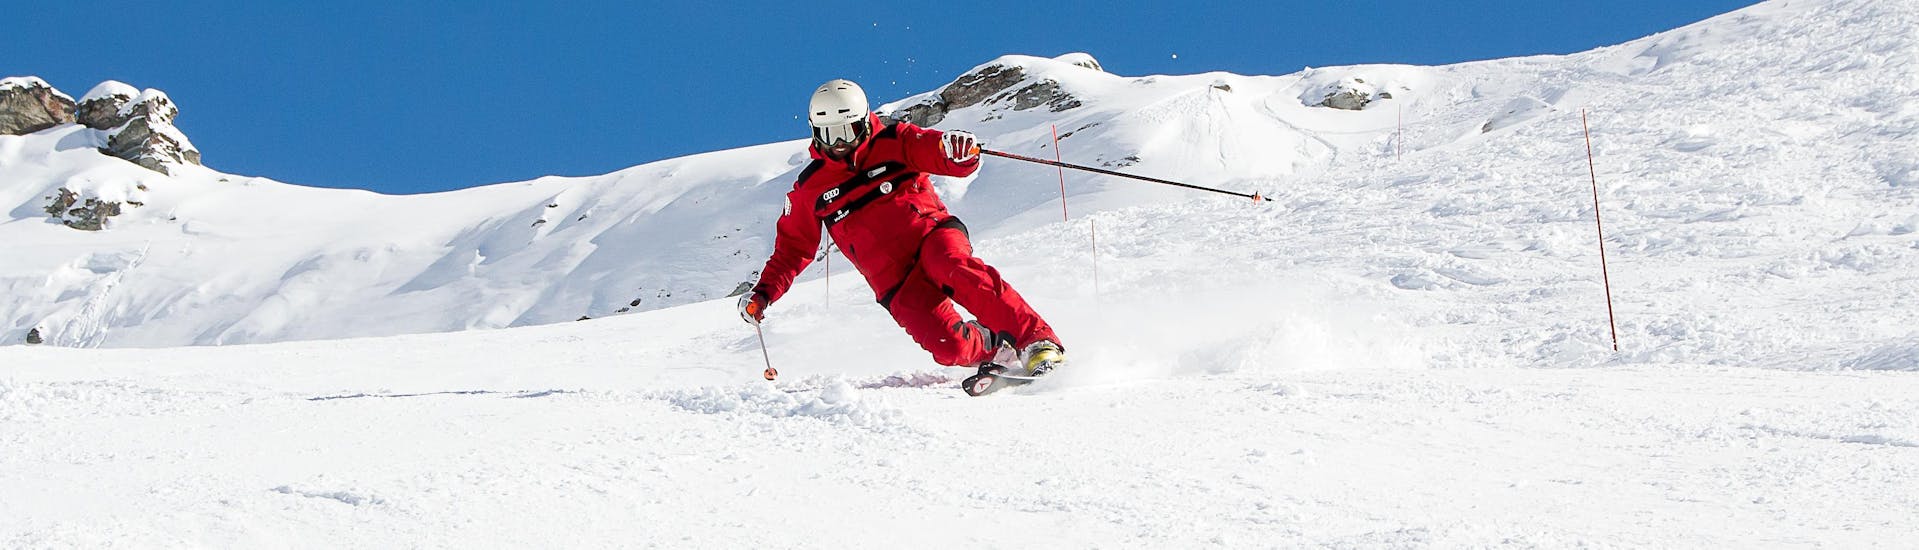 Private Telemark Skiing Lessons for All Levels.